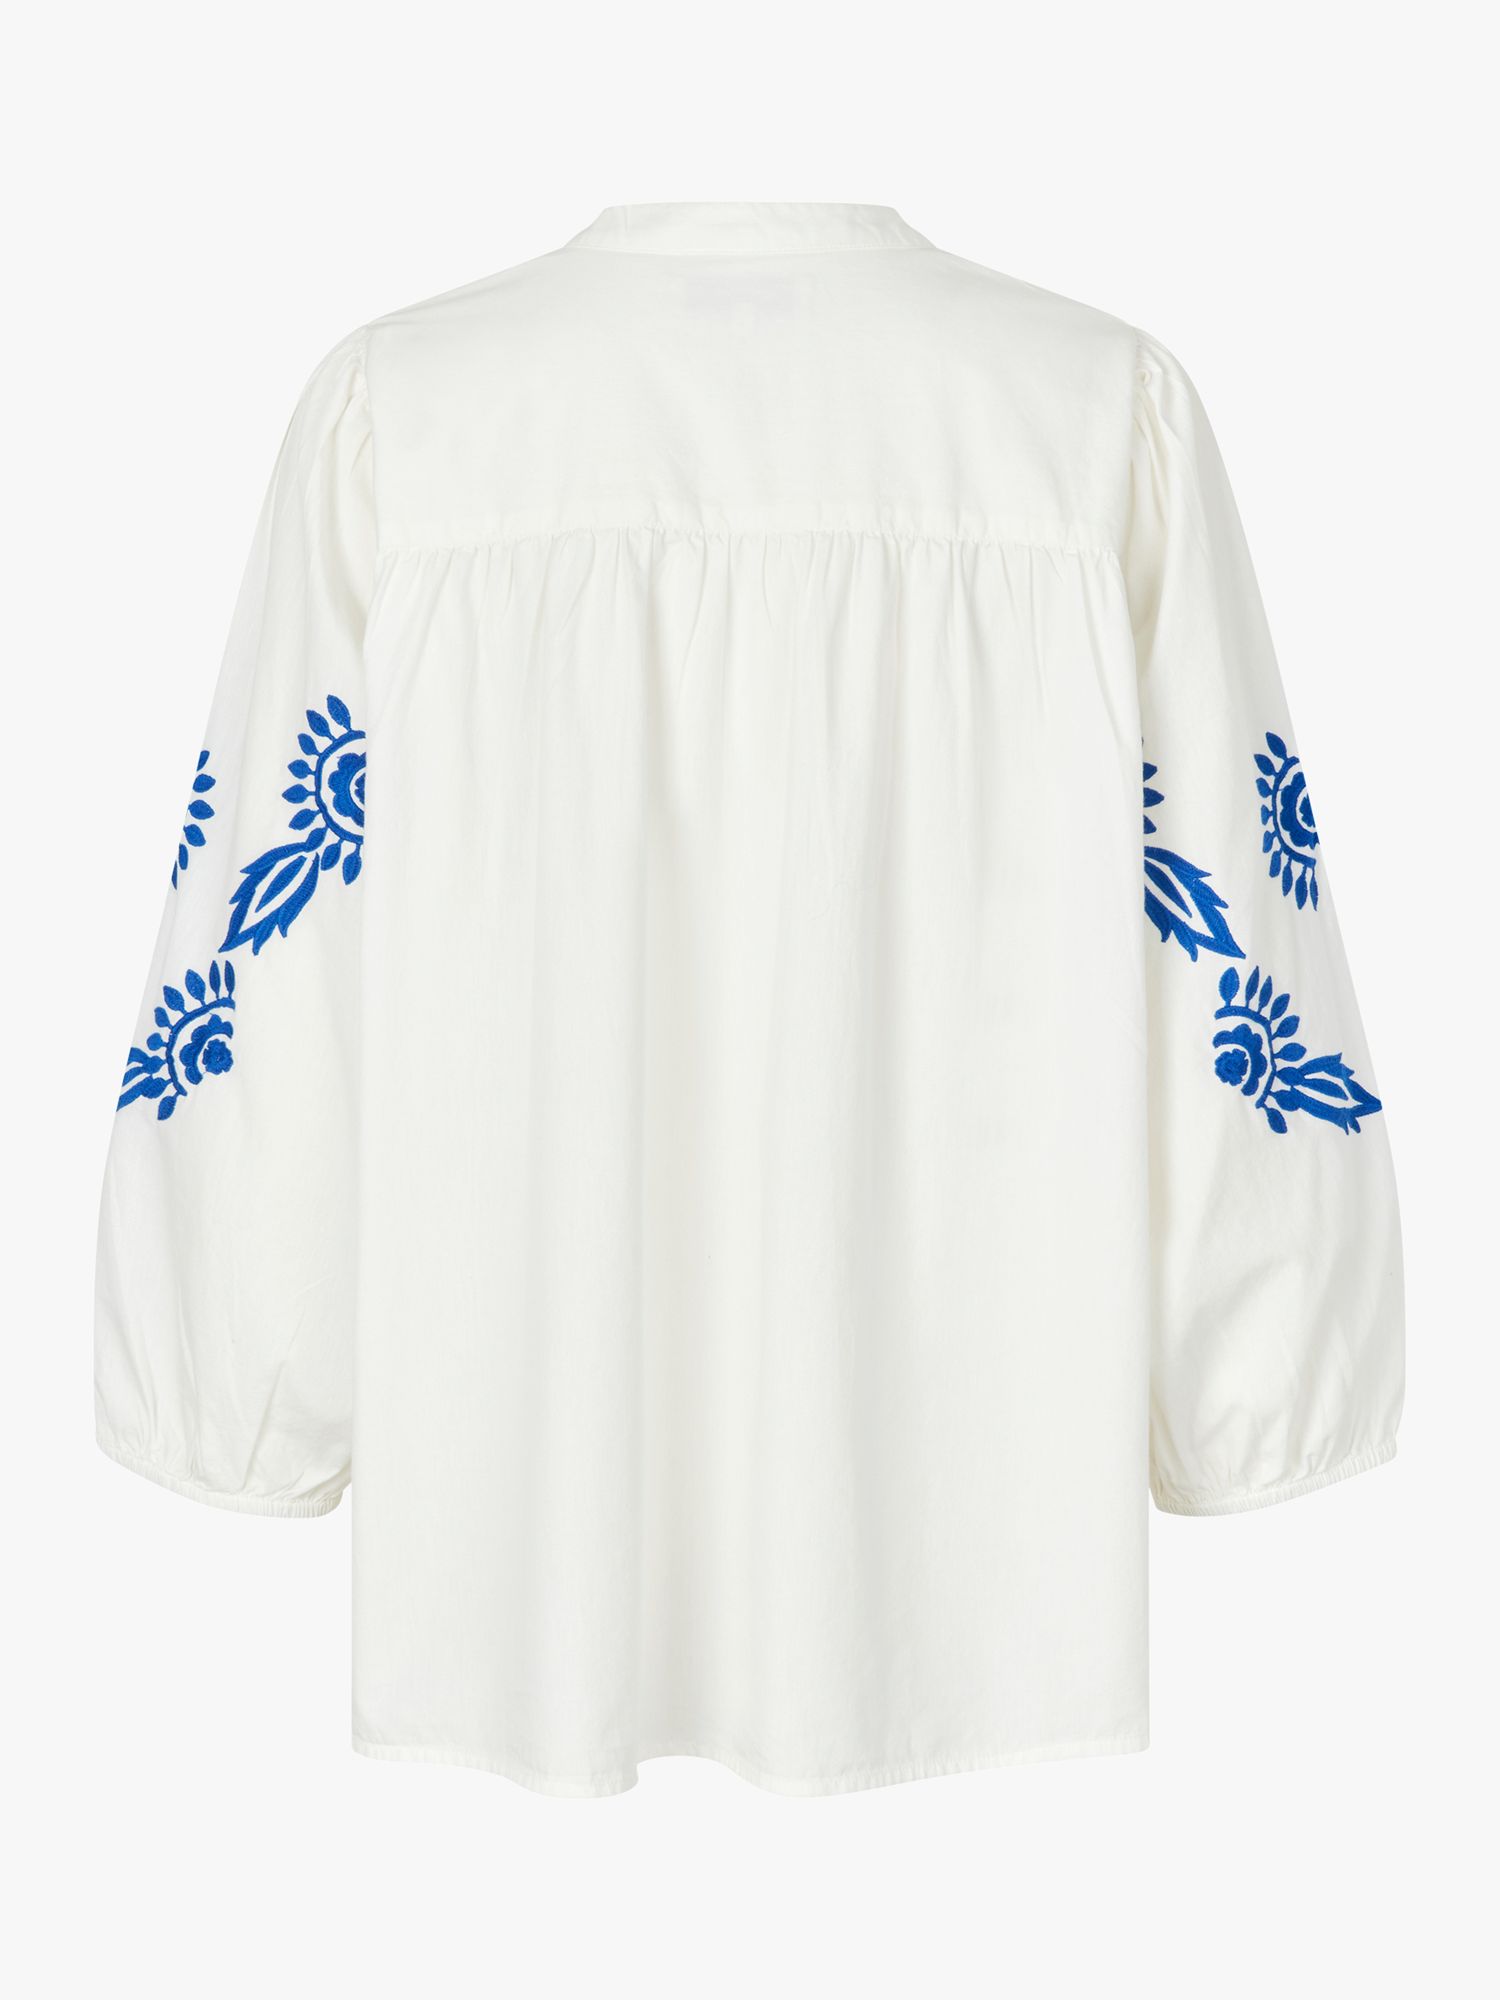 Buy Lollys Laundry Faith Embroidered Sleeve Blouse, White/Blue Online at johnlewis.com